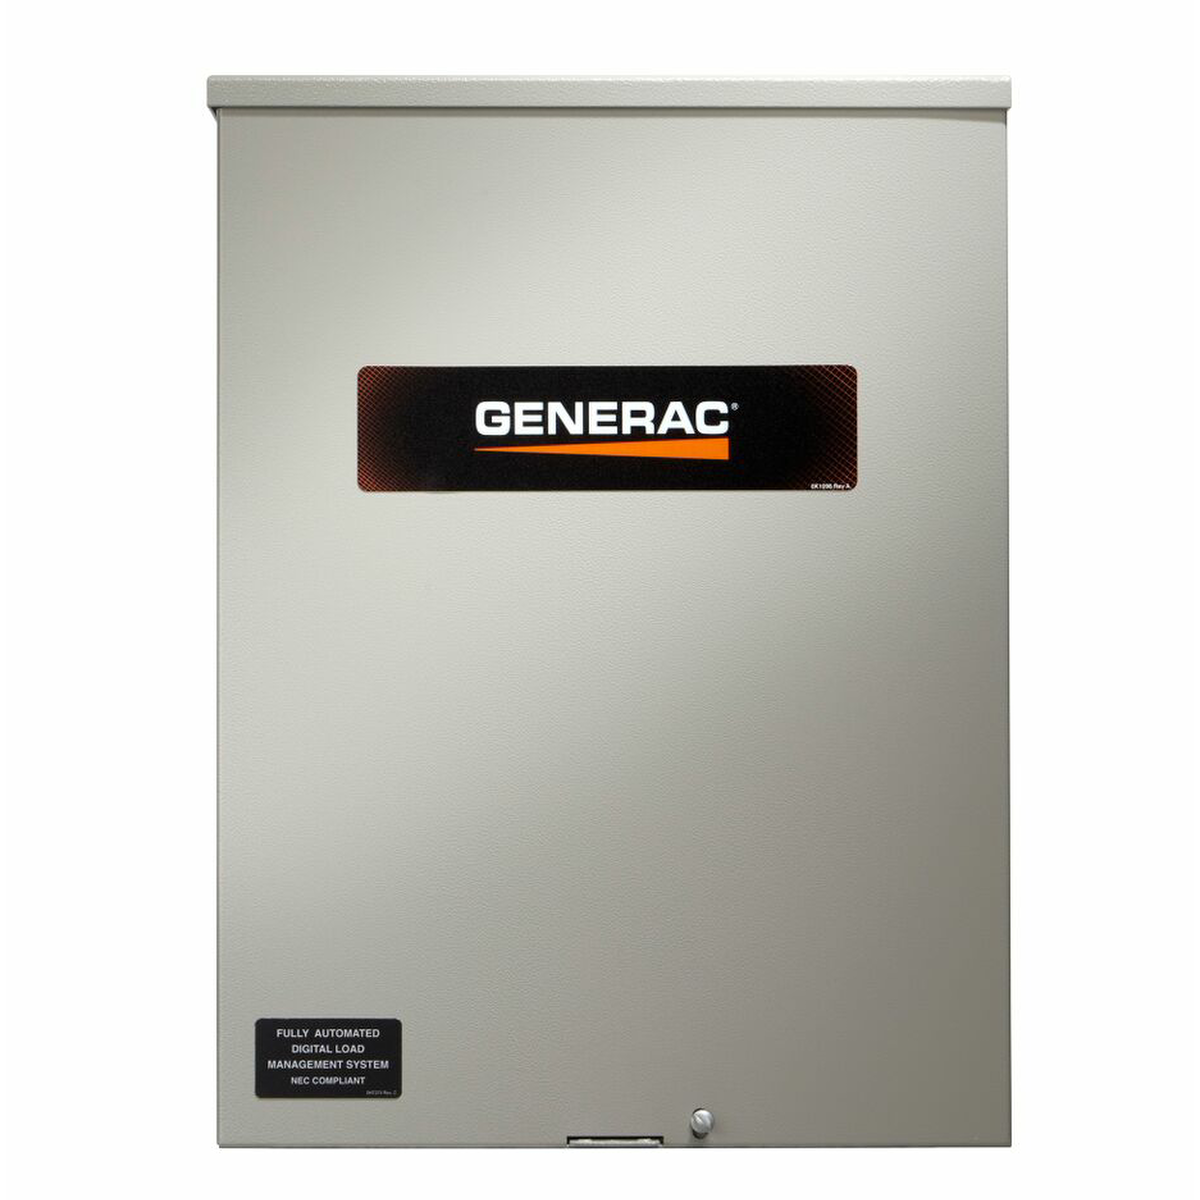 Generac RXSW100A3 100 Amp Service Entrance Rated Automatic Transfer Switch New